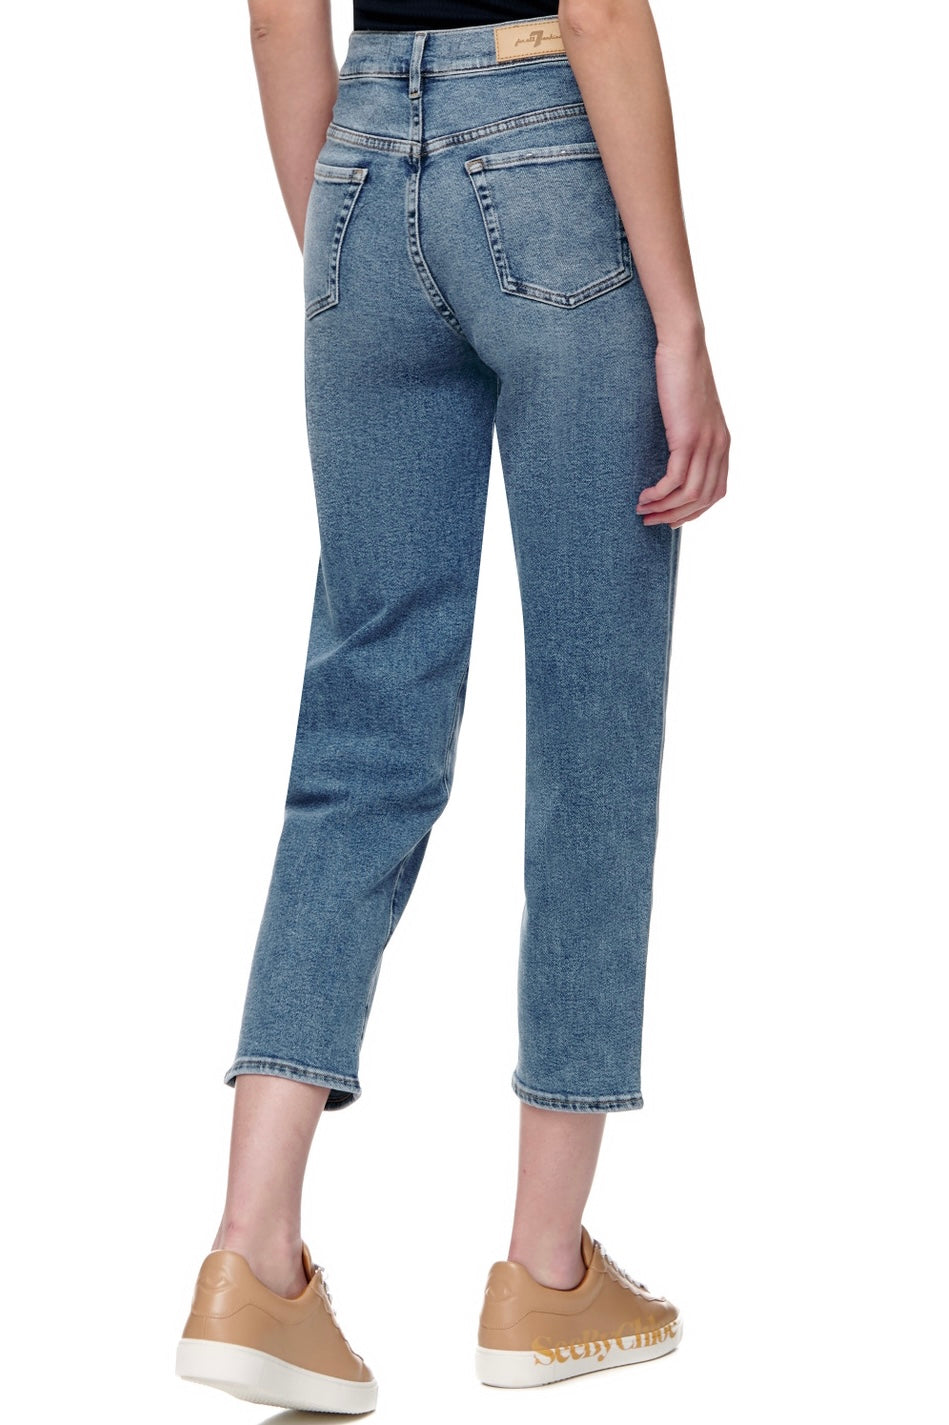 7 For All Mankind - Malia Never Better Luxe Vintage Jean